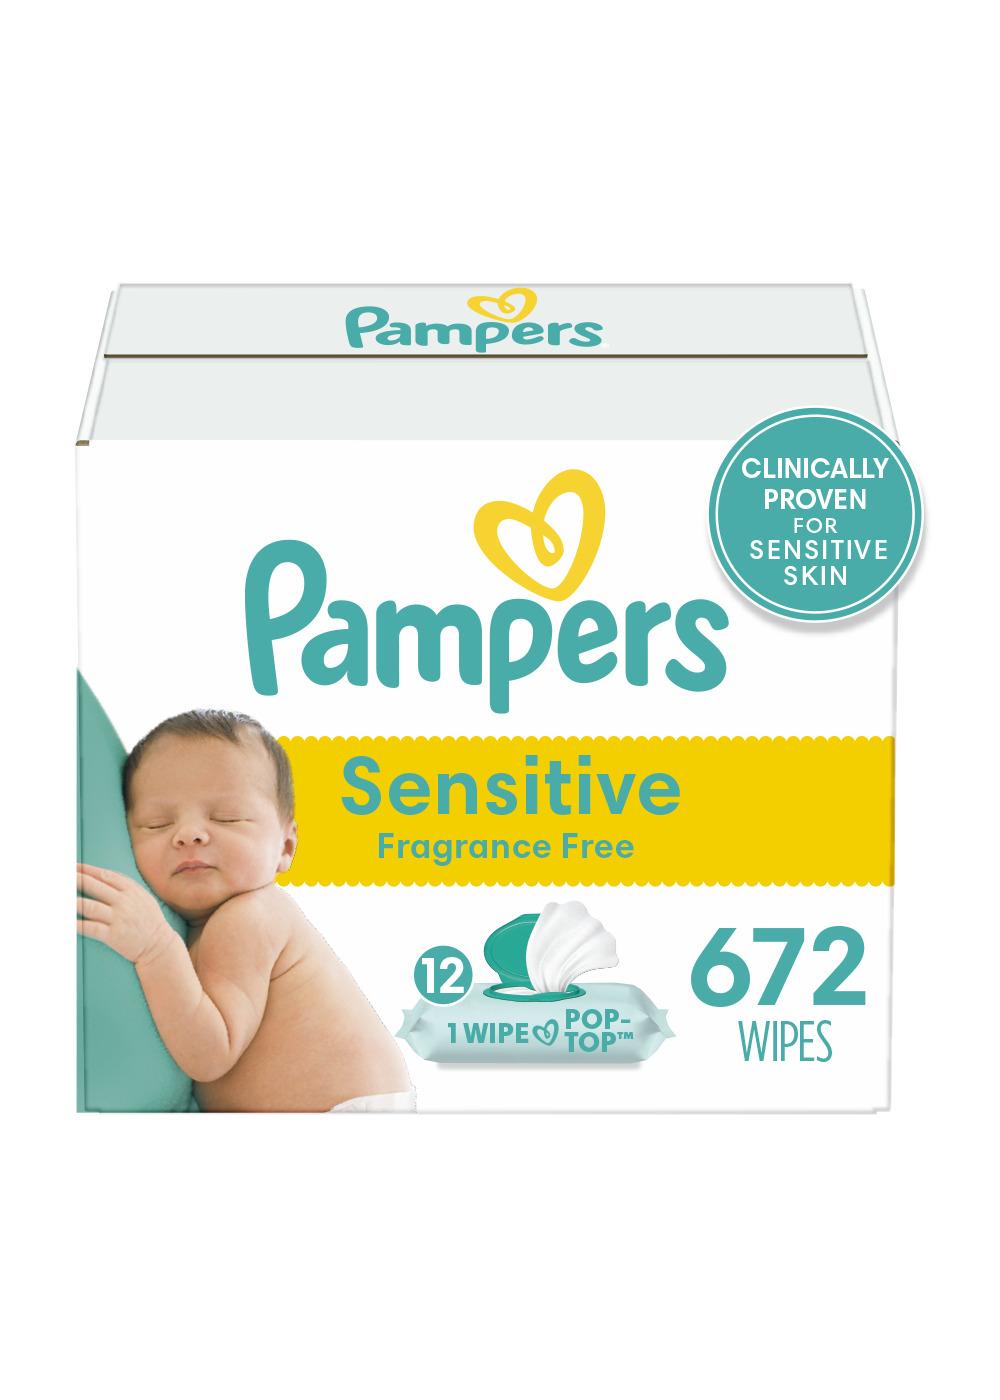 Pampers Sensitive Skin & Fragrance Free Baby Wipes 12 Pk; image 10 of 10